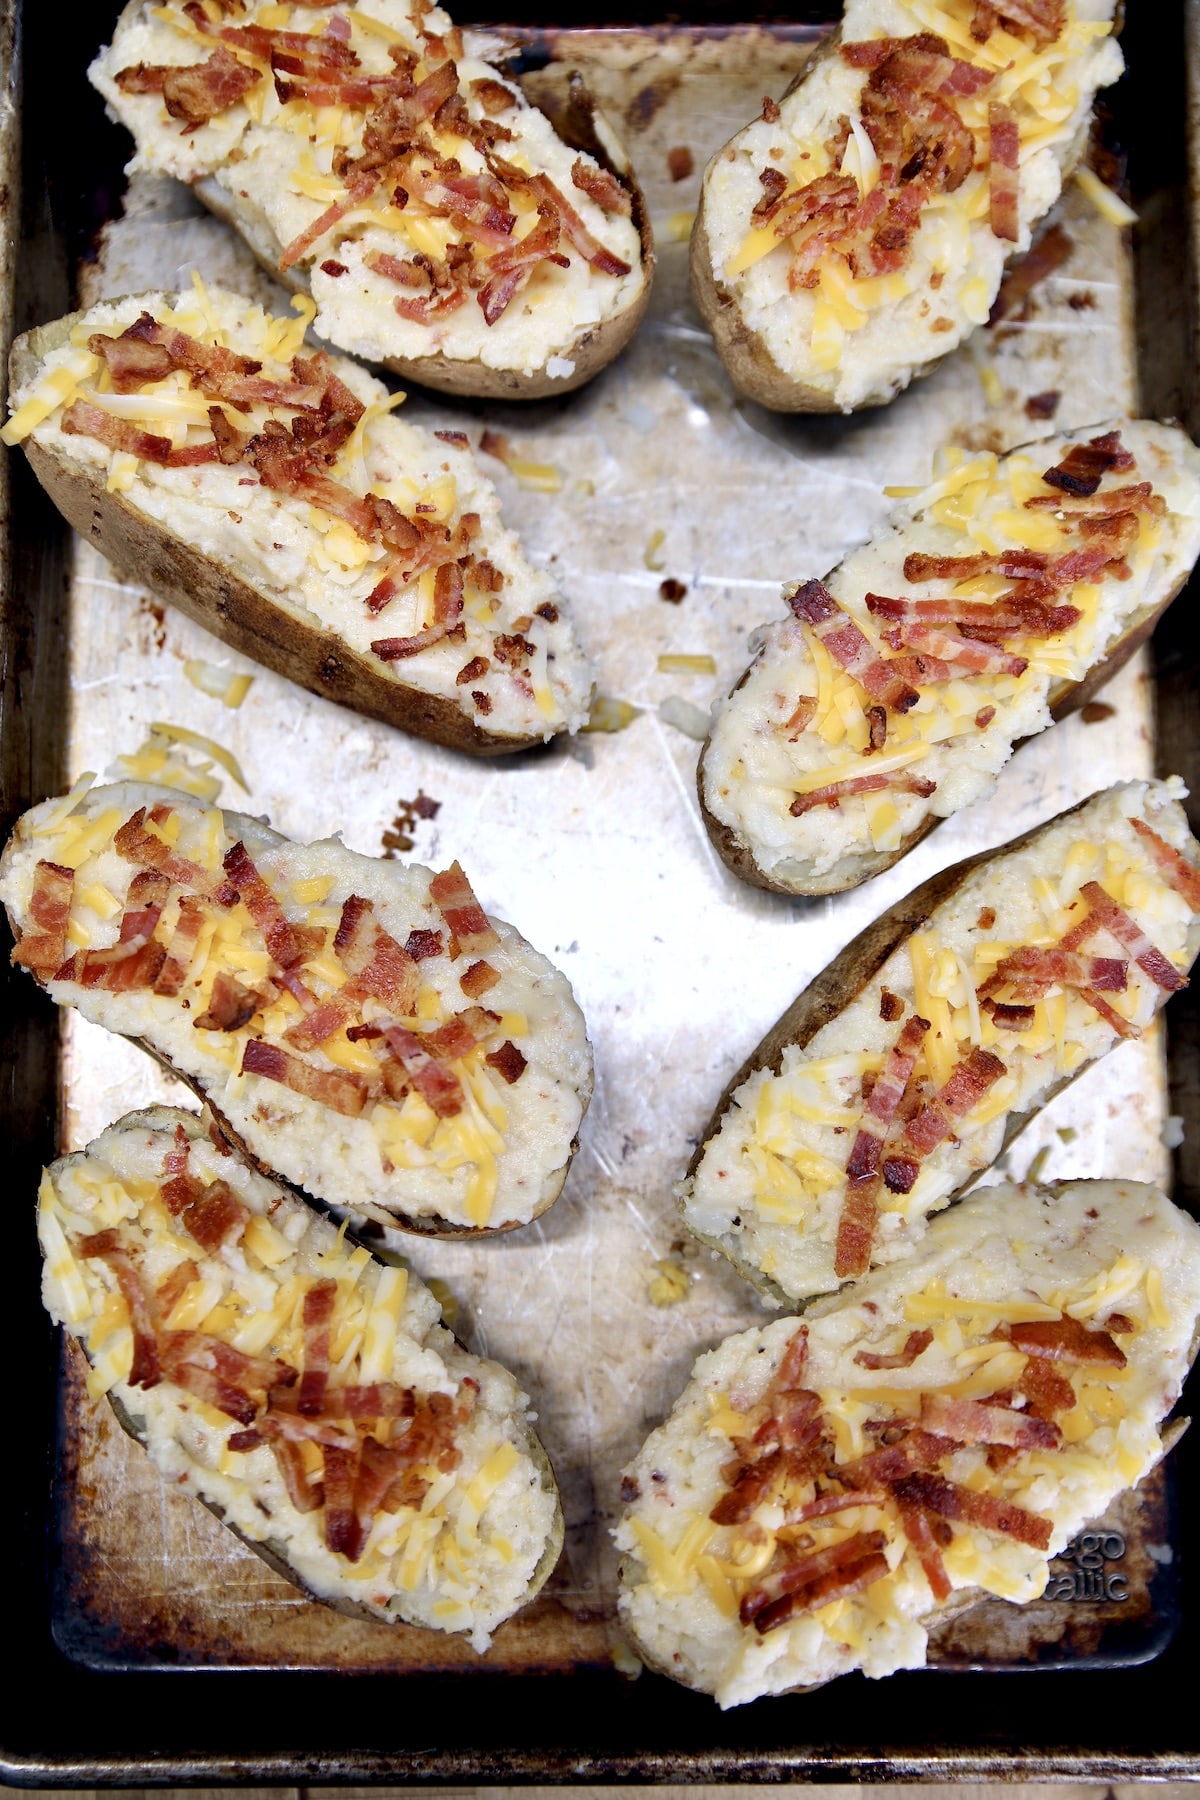 Cheese and bacon twice baked potatoes.